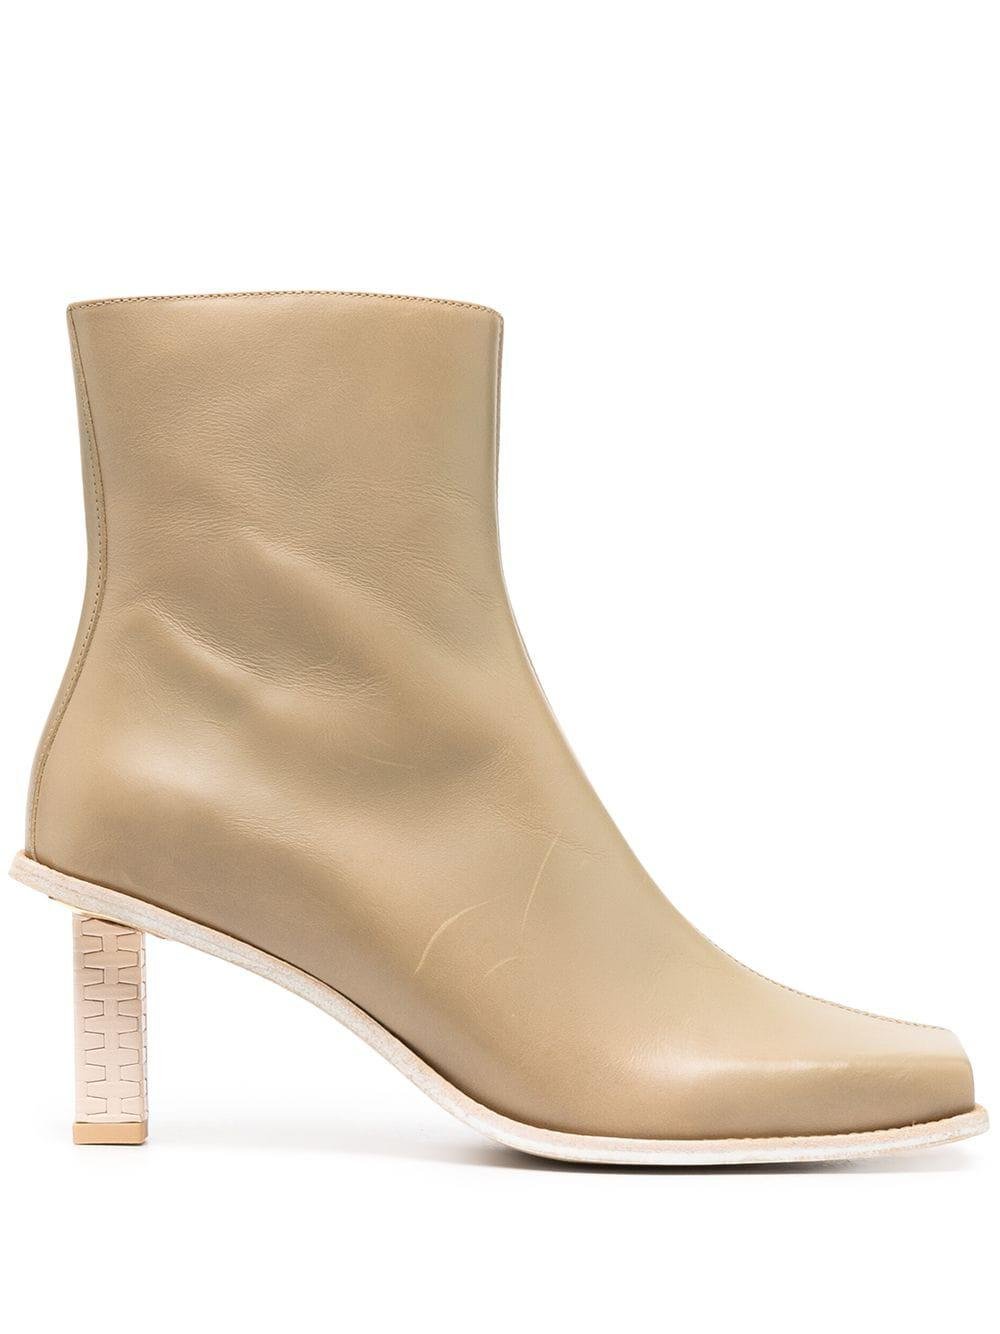 Carro Basses ankle boots by JACQUEMUS